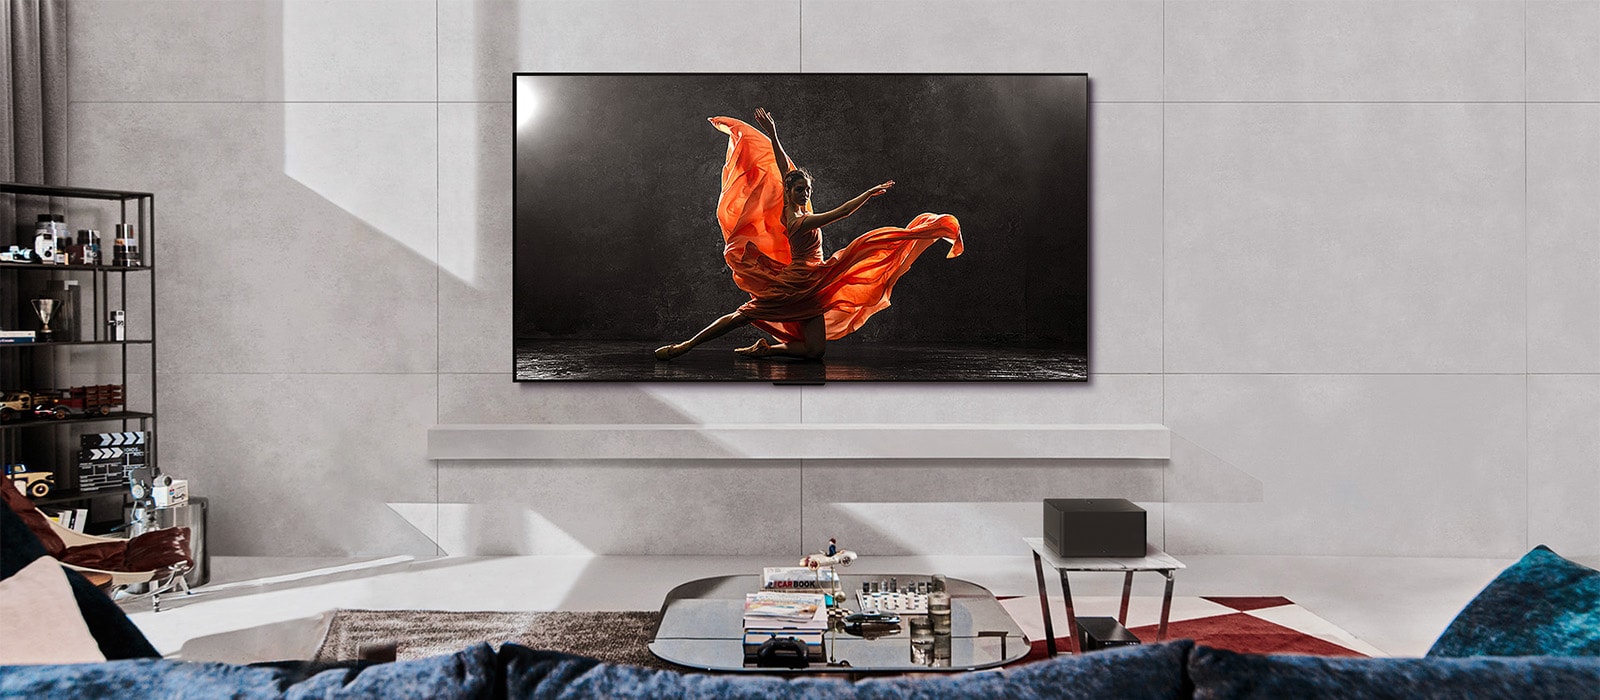 LG SIGNATURE OLED M4 and LG Soundbar in a modern living space in daytime. The screen image of a dancer on a dark stage is displayed with the ideal brightness levels.